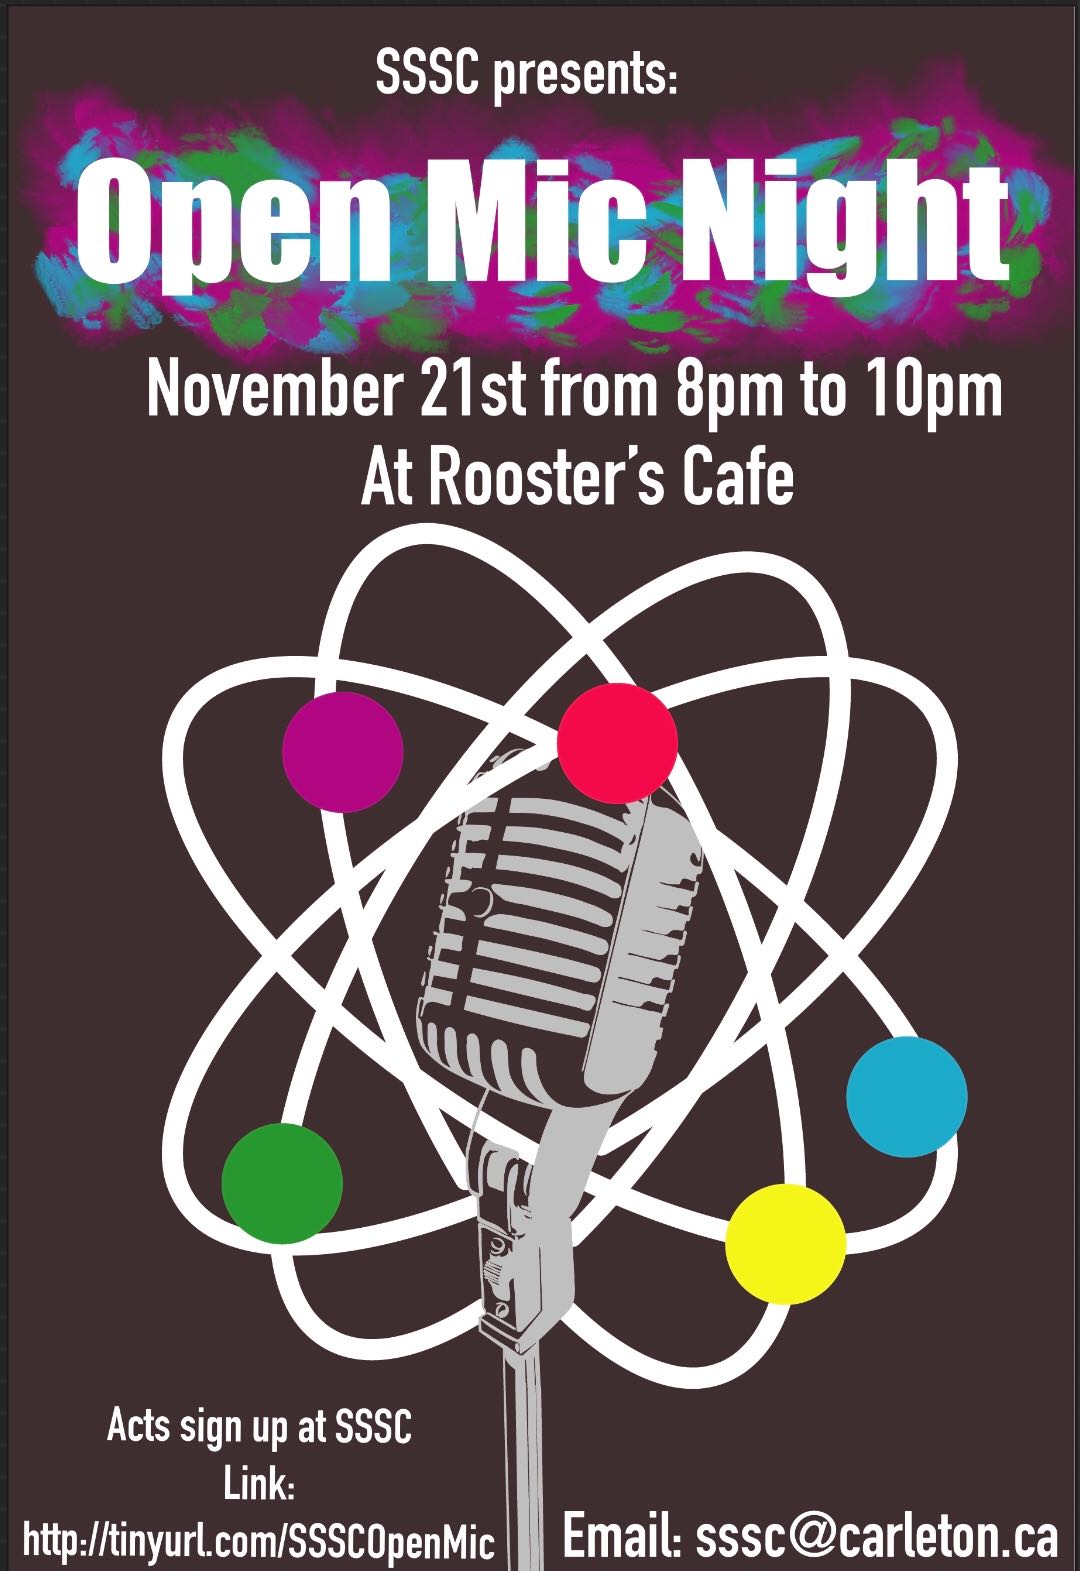 The poster for the SSSC Open Mic Night on November 21st at 8:00pm 